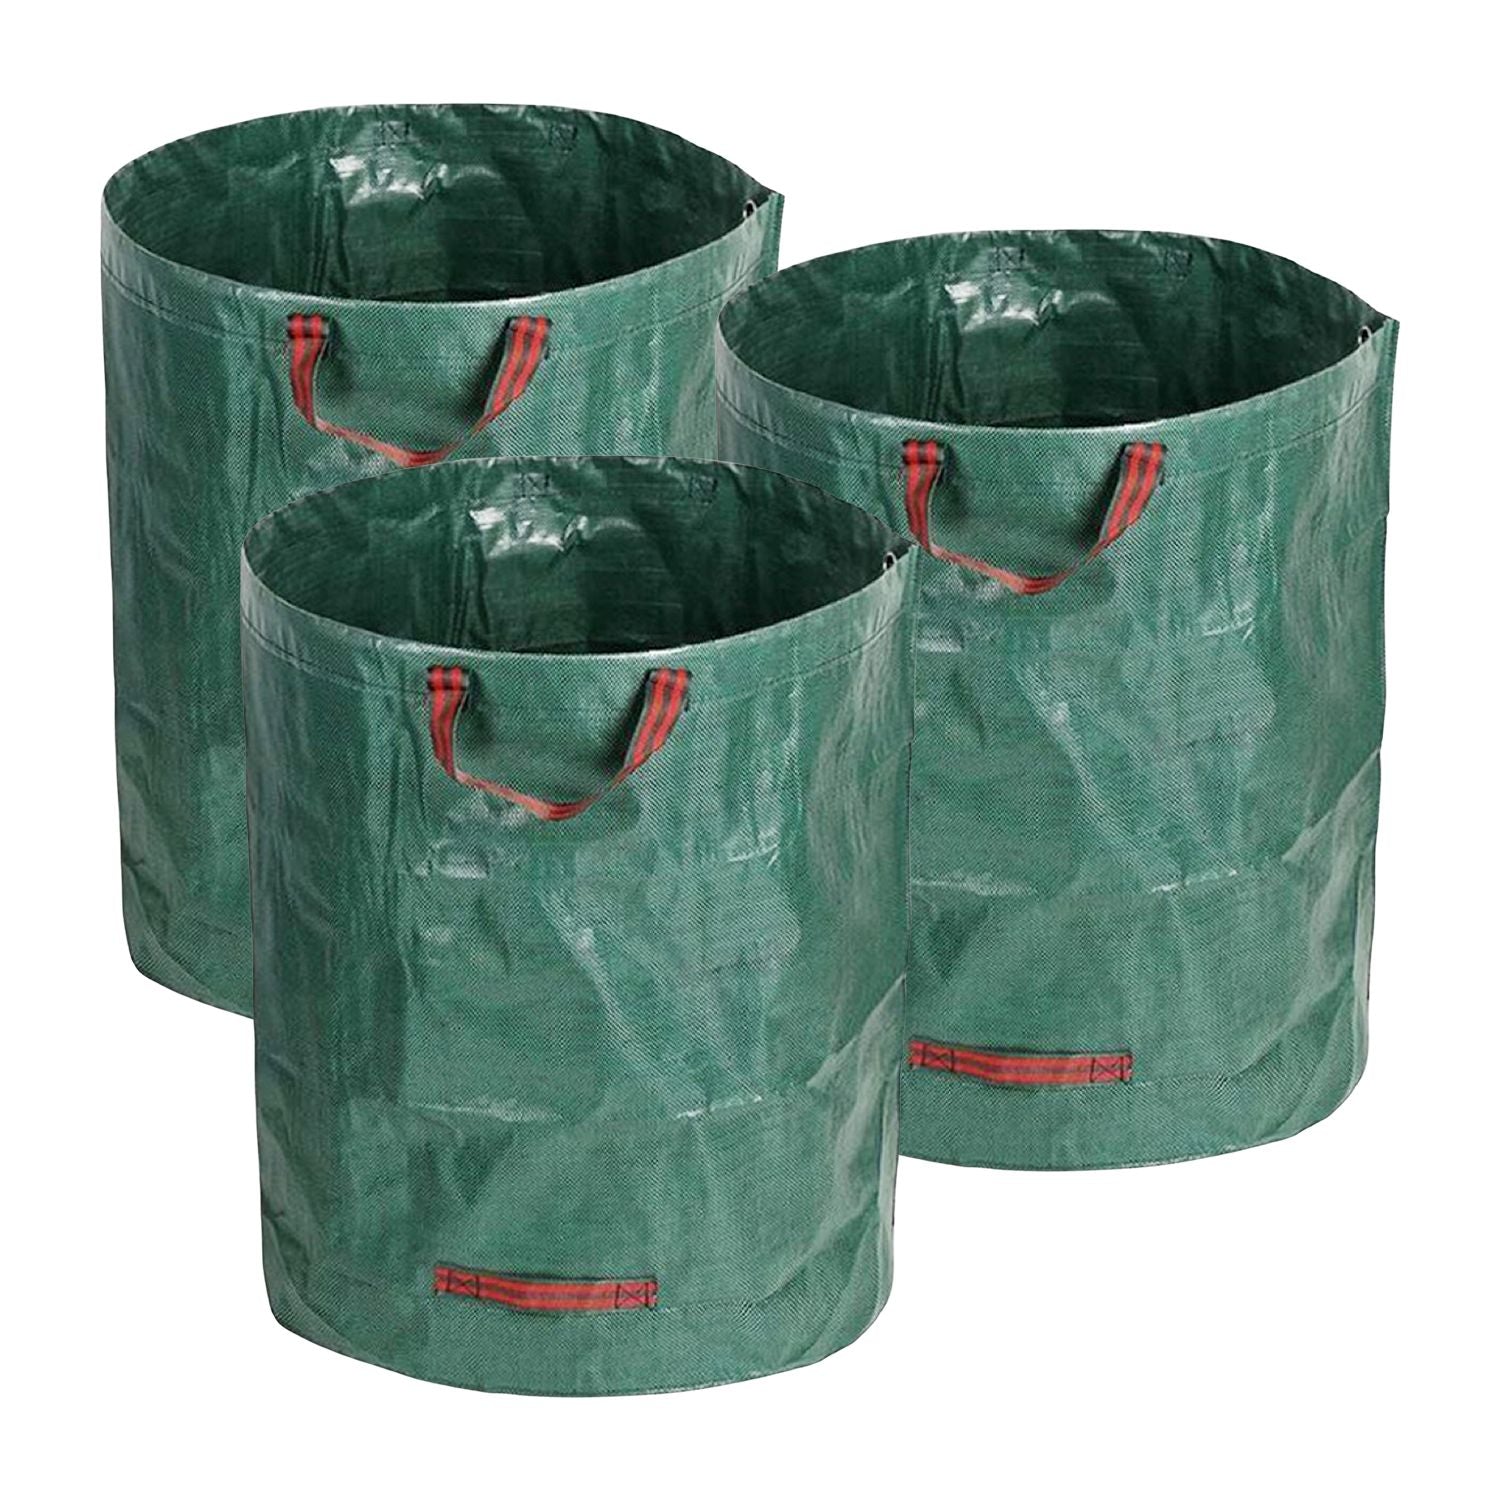 NOVEDEN 3 Packs Garden Waste Bags with 72 gallons (Green)